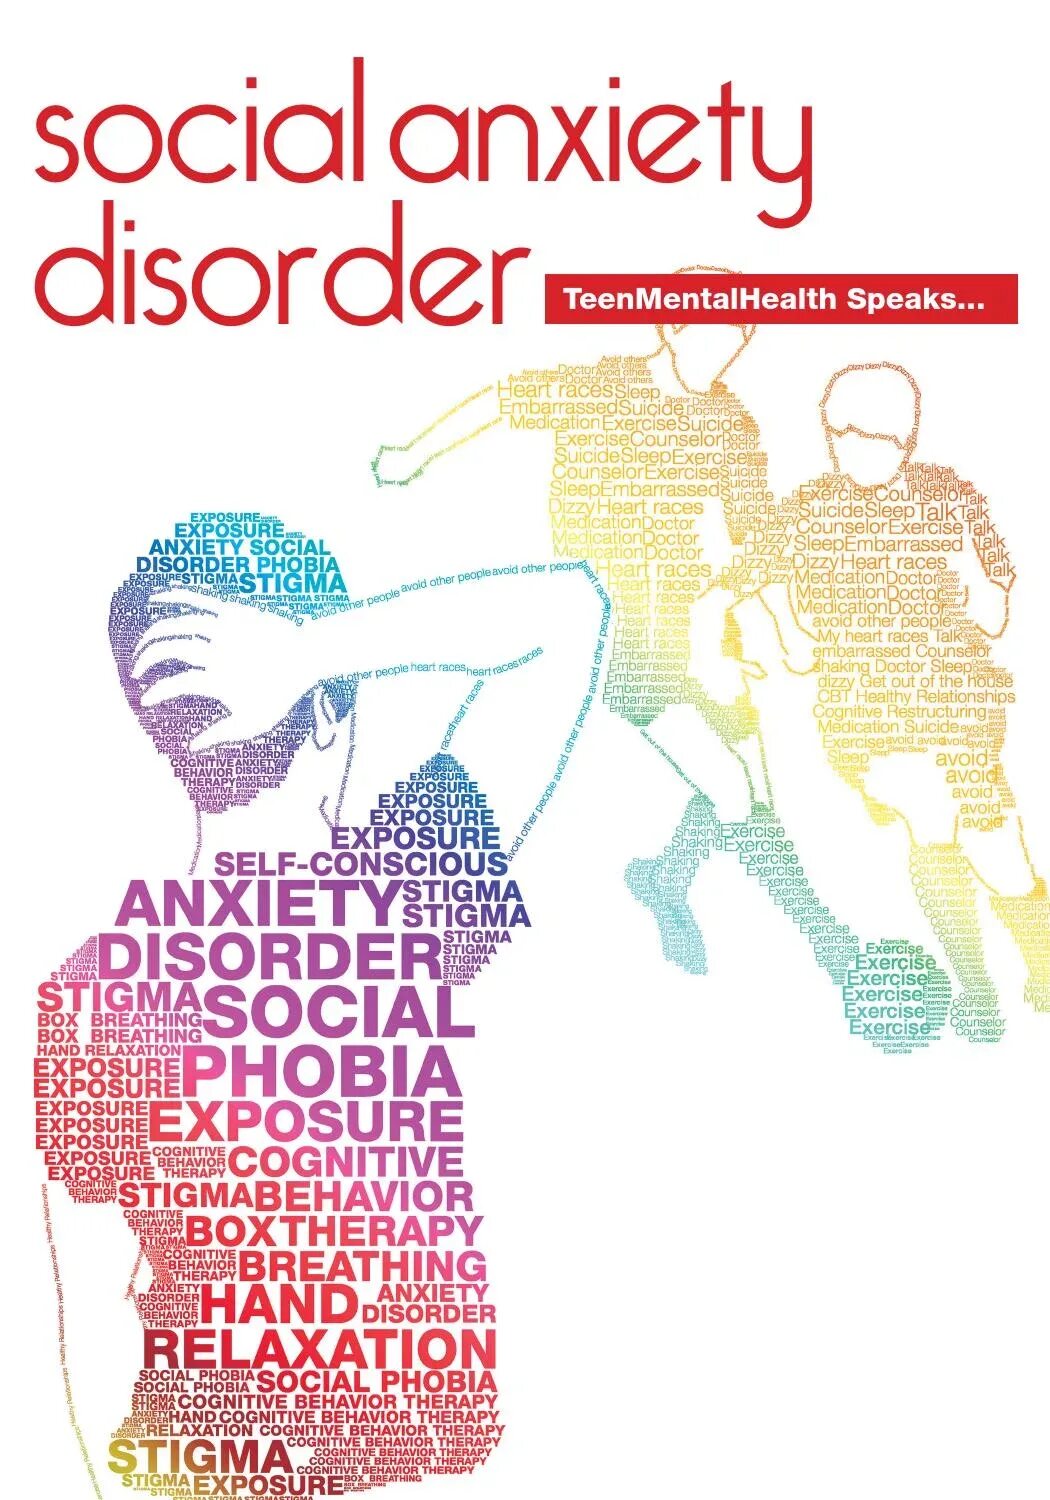 Anxiety Disorders. Social Disorder. Social Anxiety is. Disorder фирма.